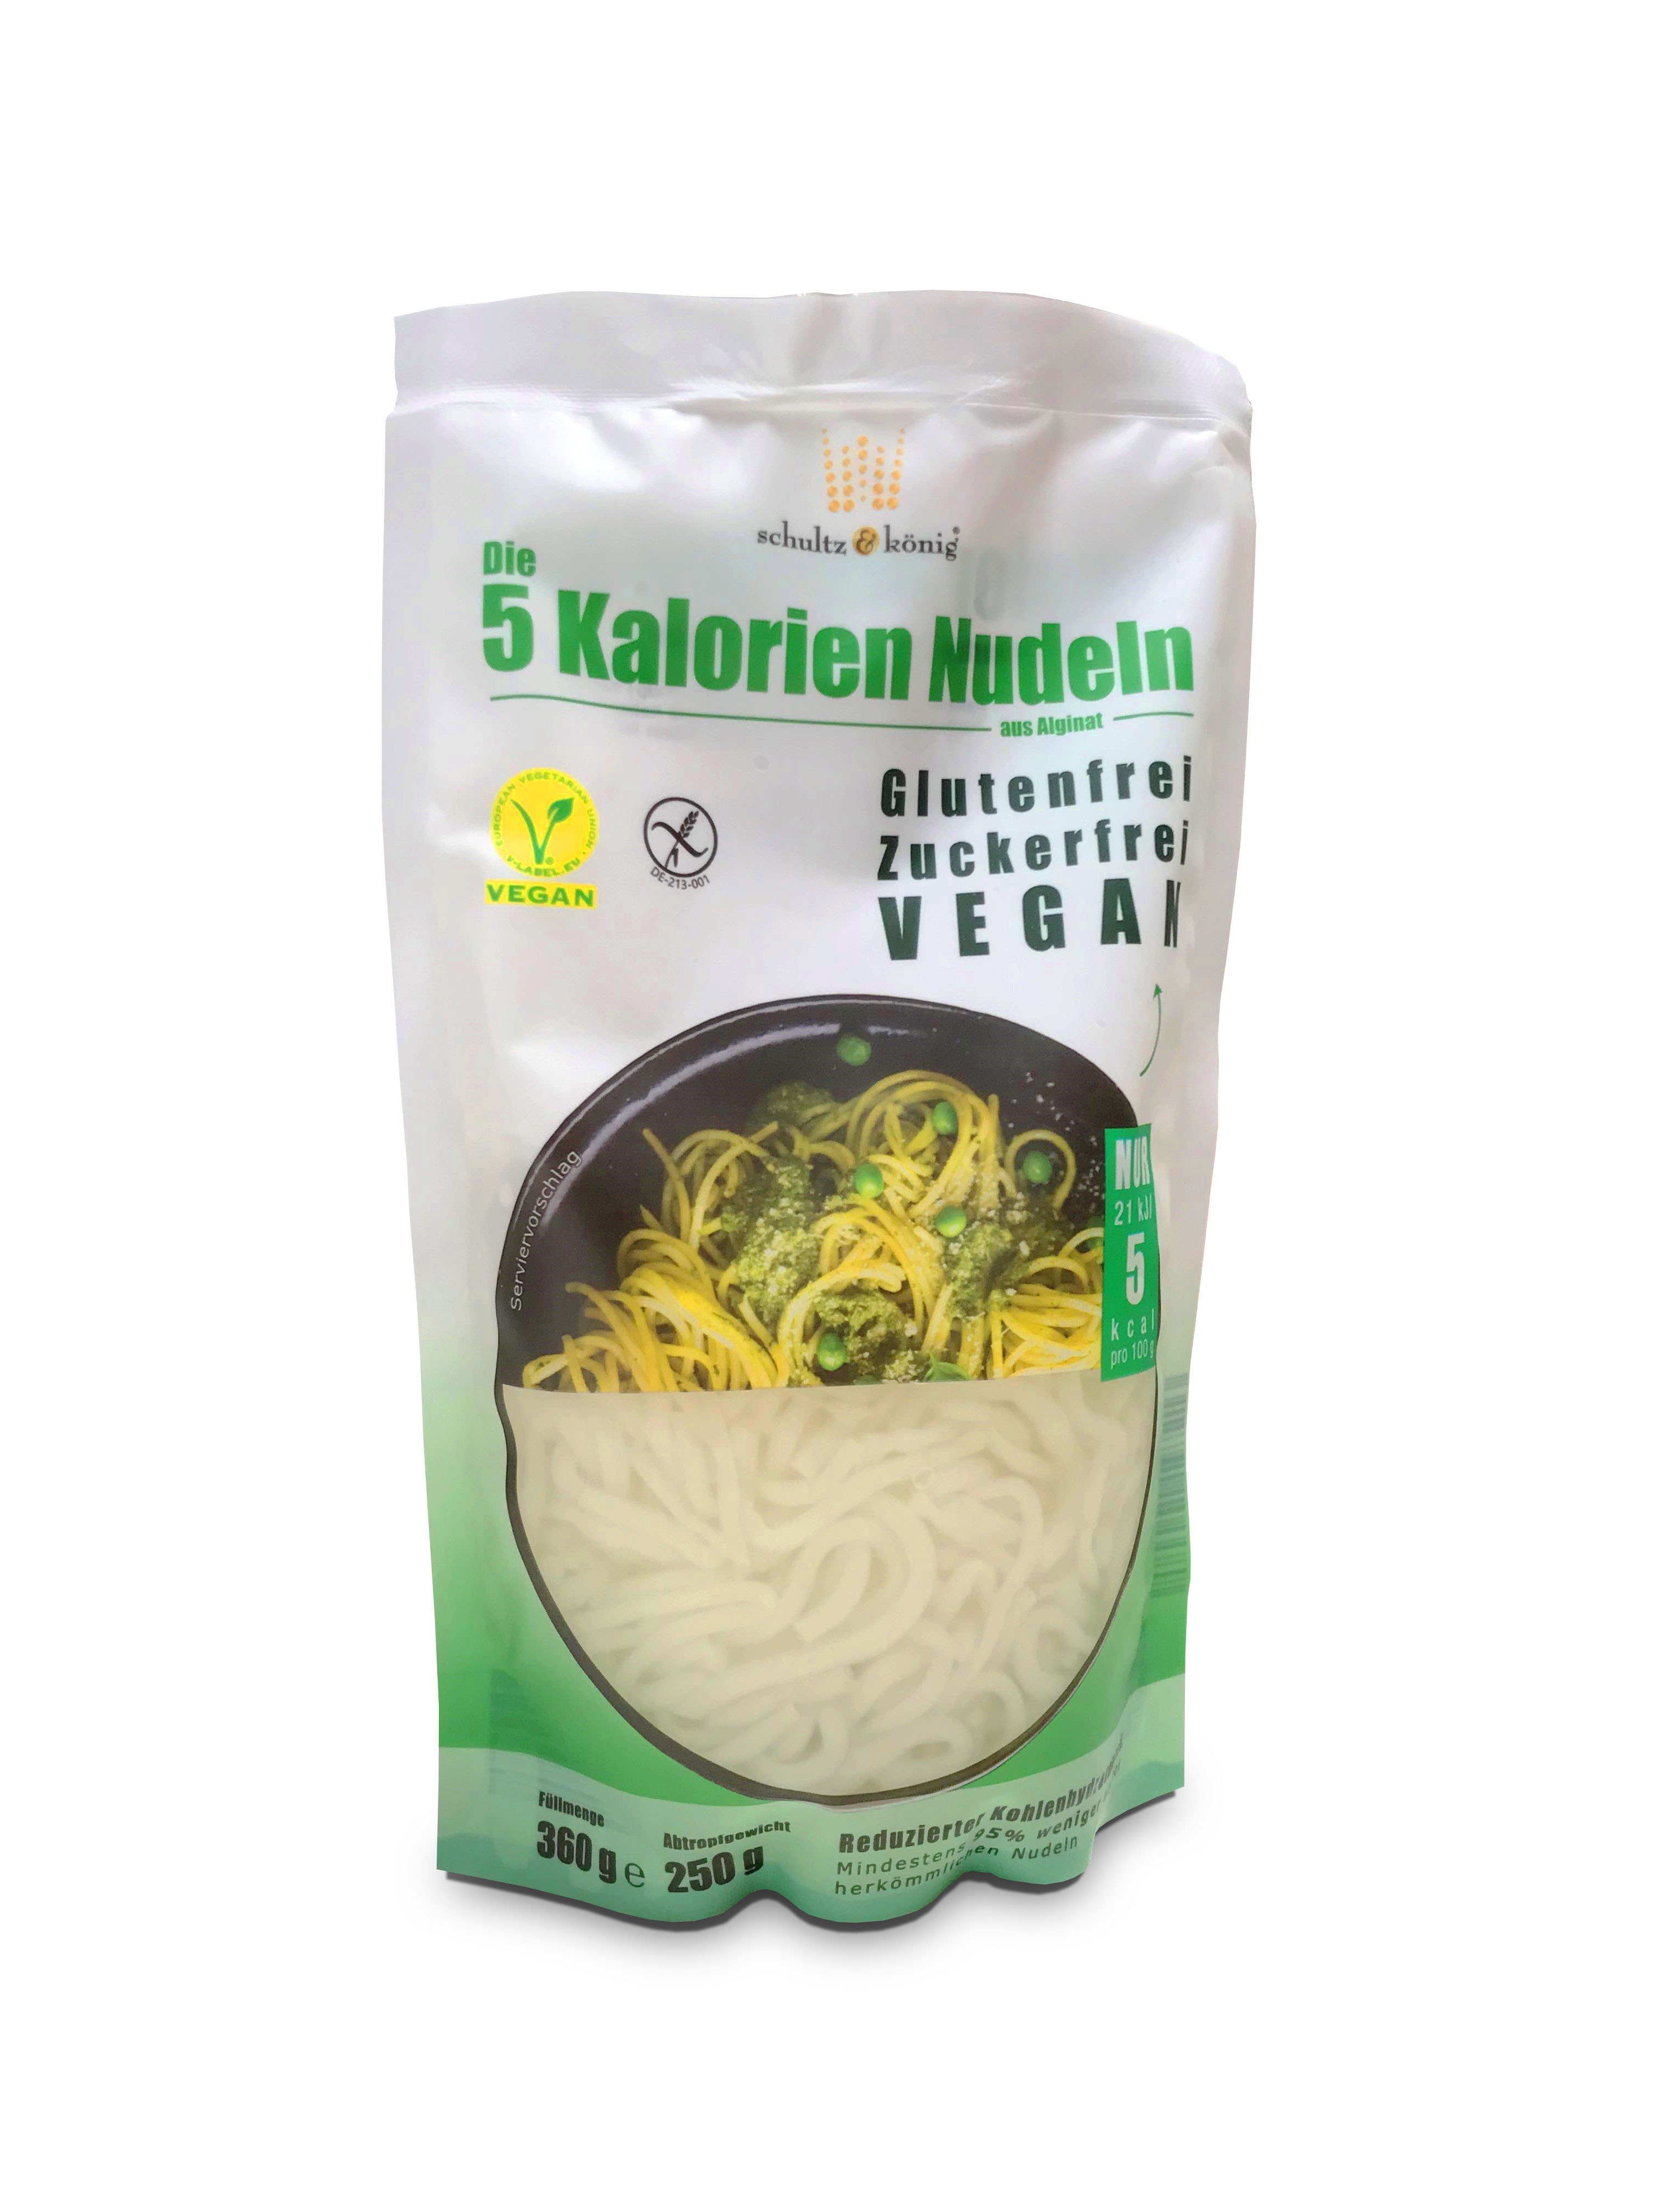 Kelp noodles (paste) are made from algae (kelp), are free from fat, sugar  and gluten and have only 5 kcal per 100 g.